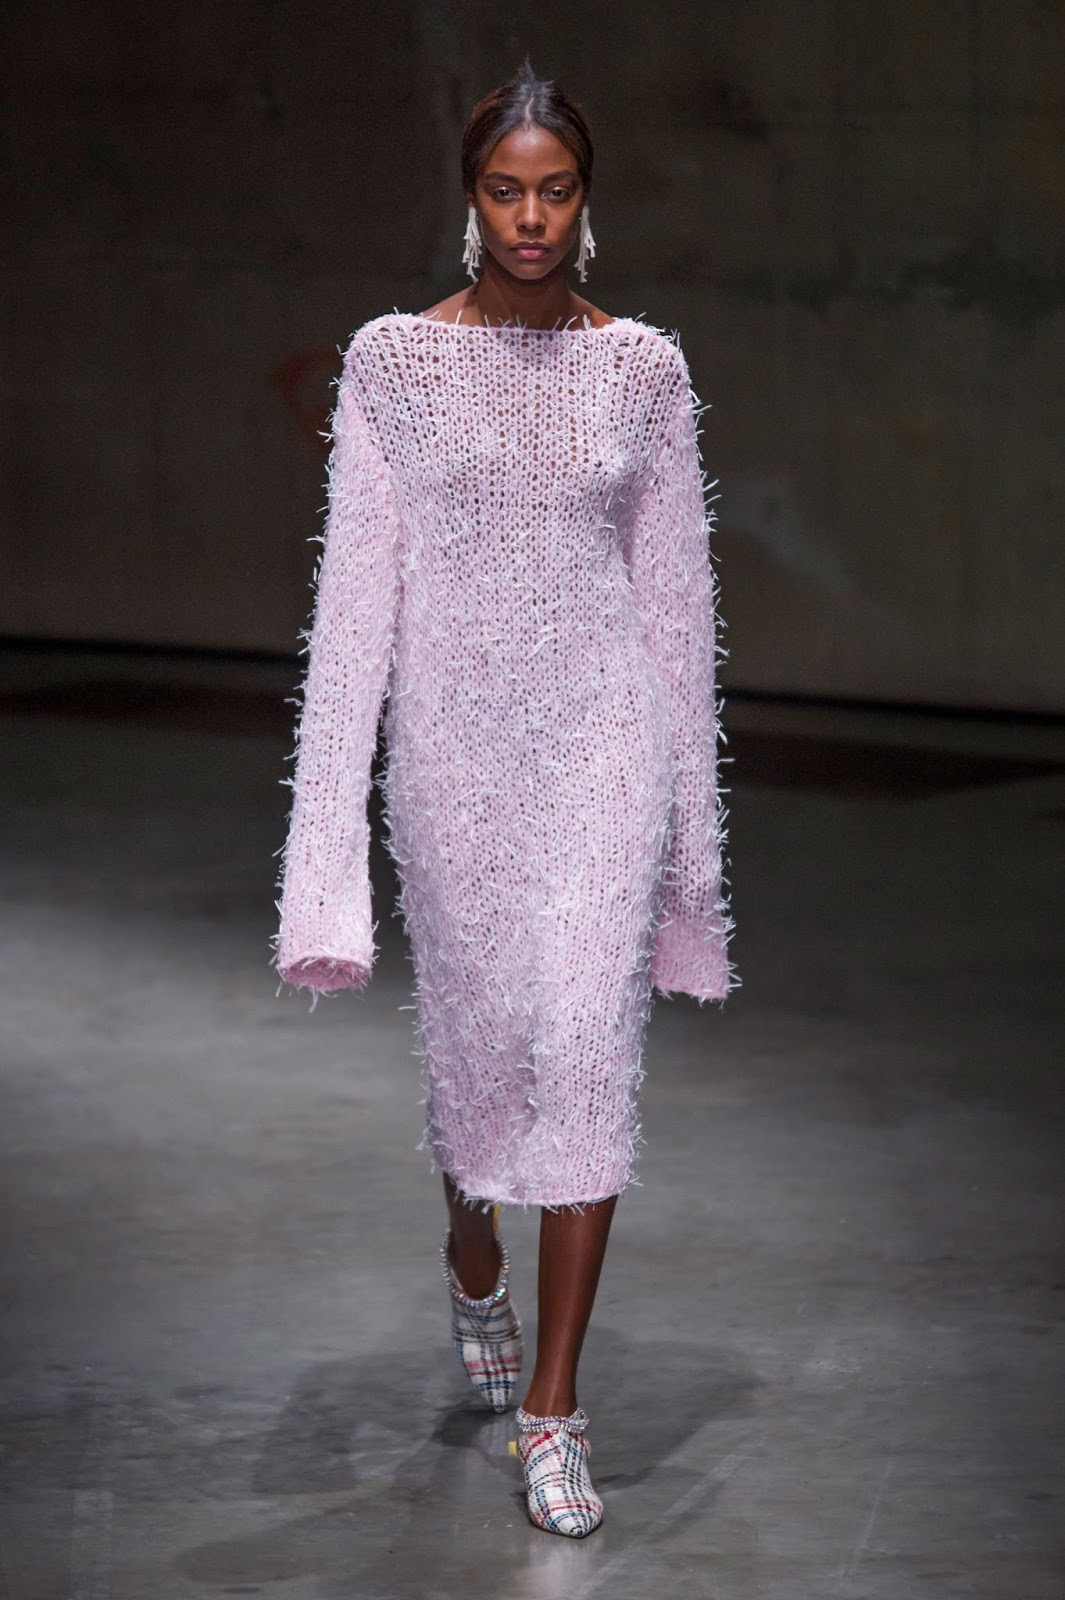 Pure, Glam, WOW: CHRISTOPHER KANE LUXE